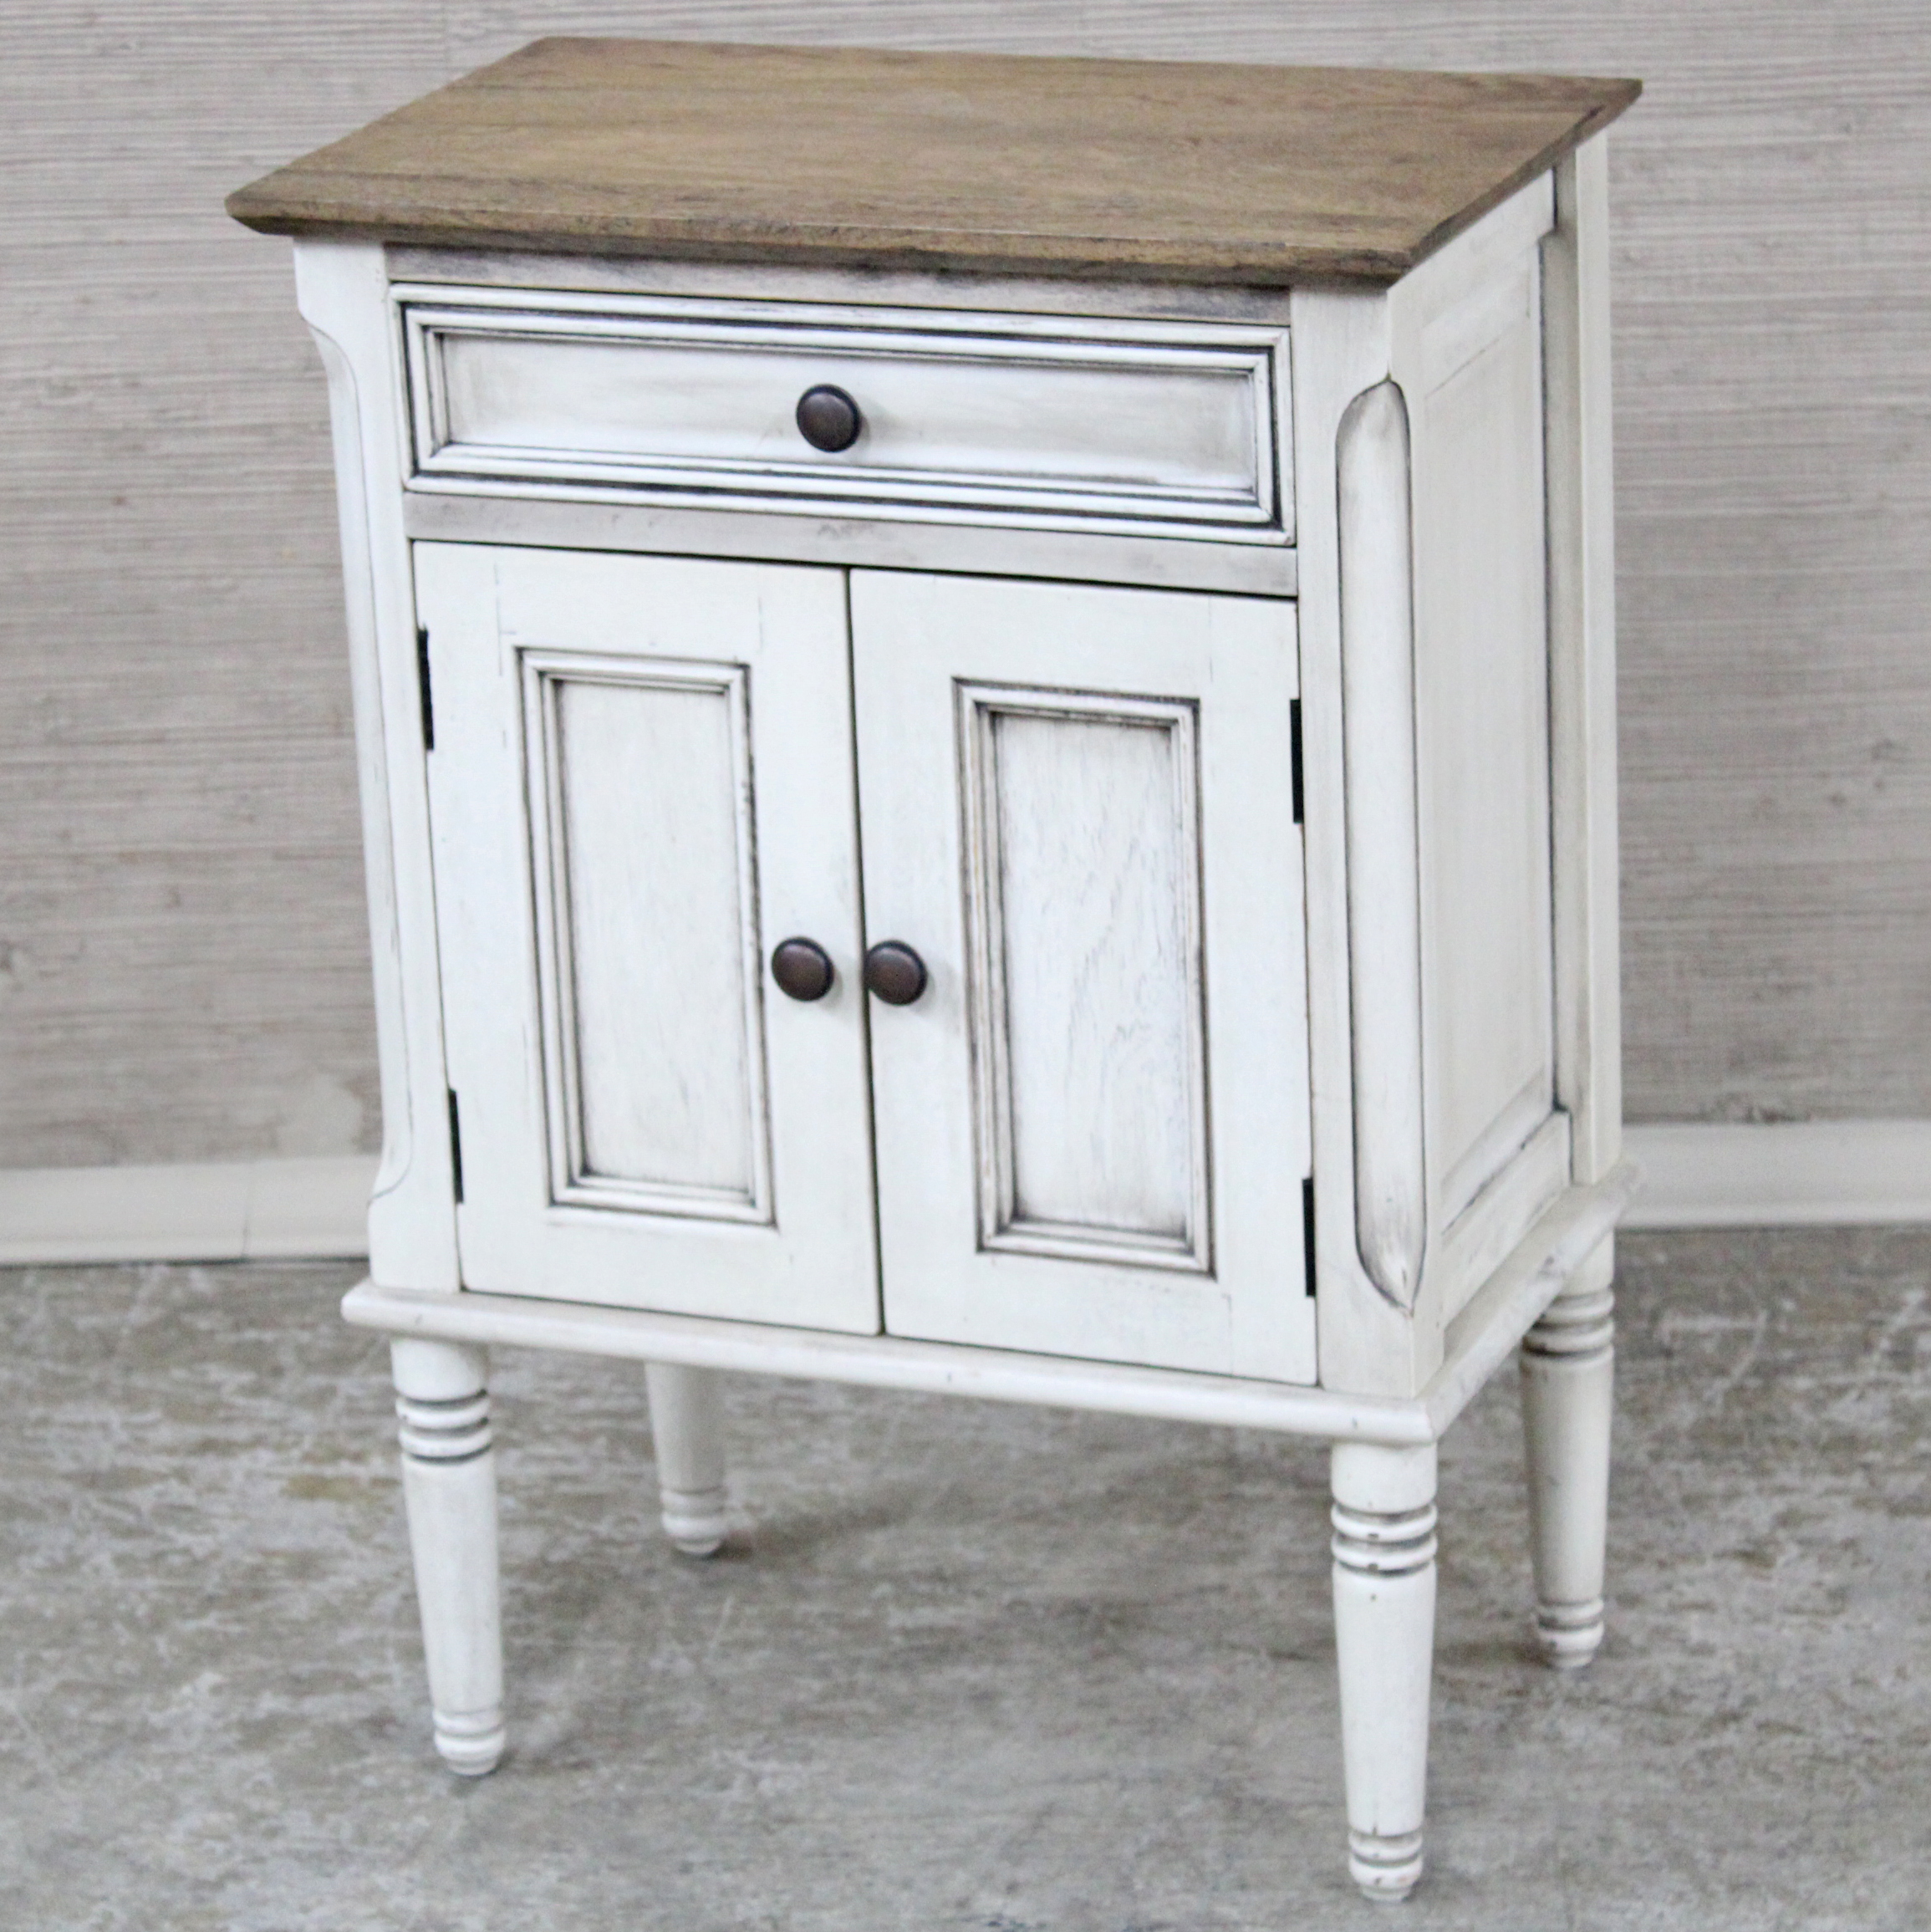 PAINTED CRAFTSMAN CABINET PAINTED 35f28b